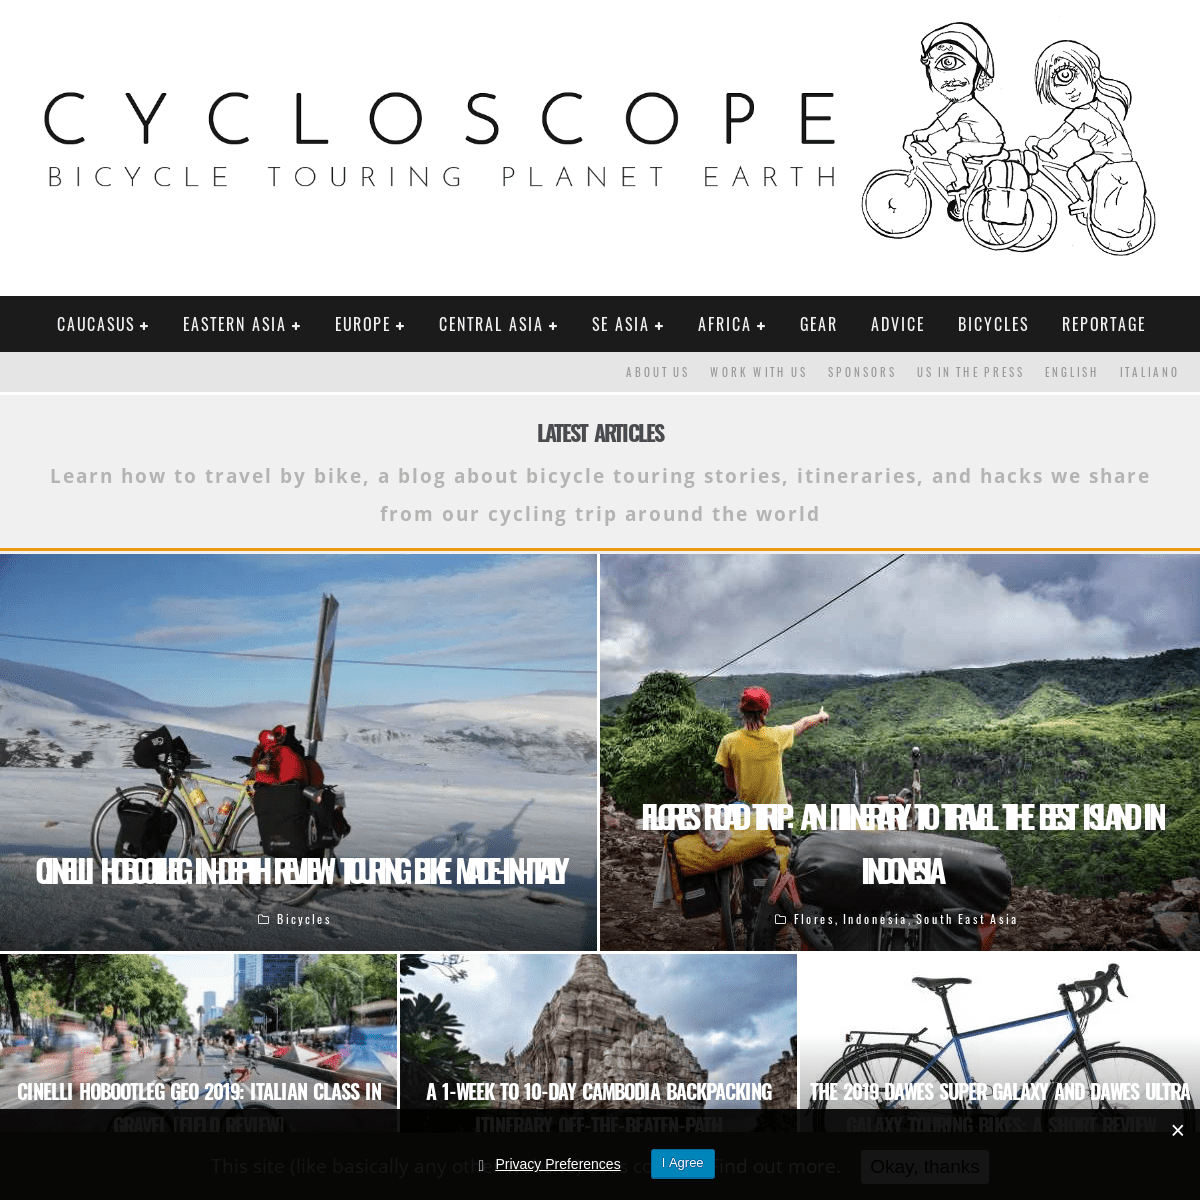 A complete backup of cycloscope.net